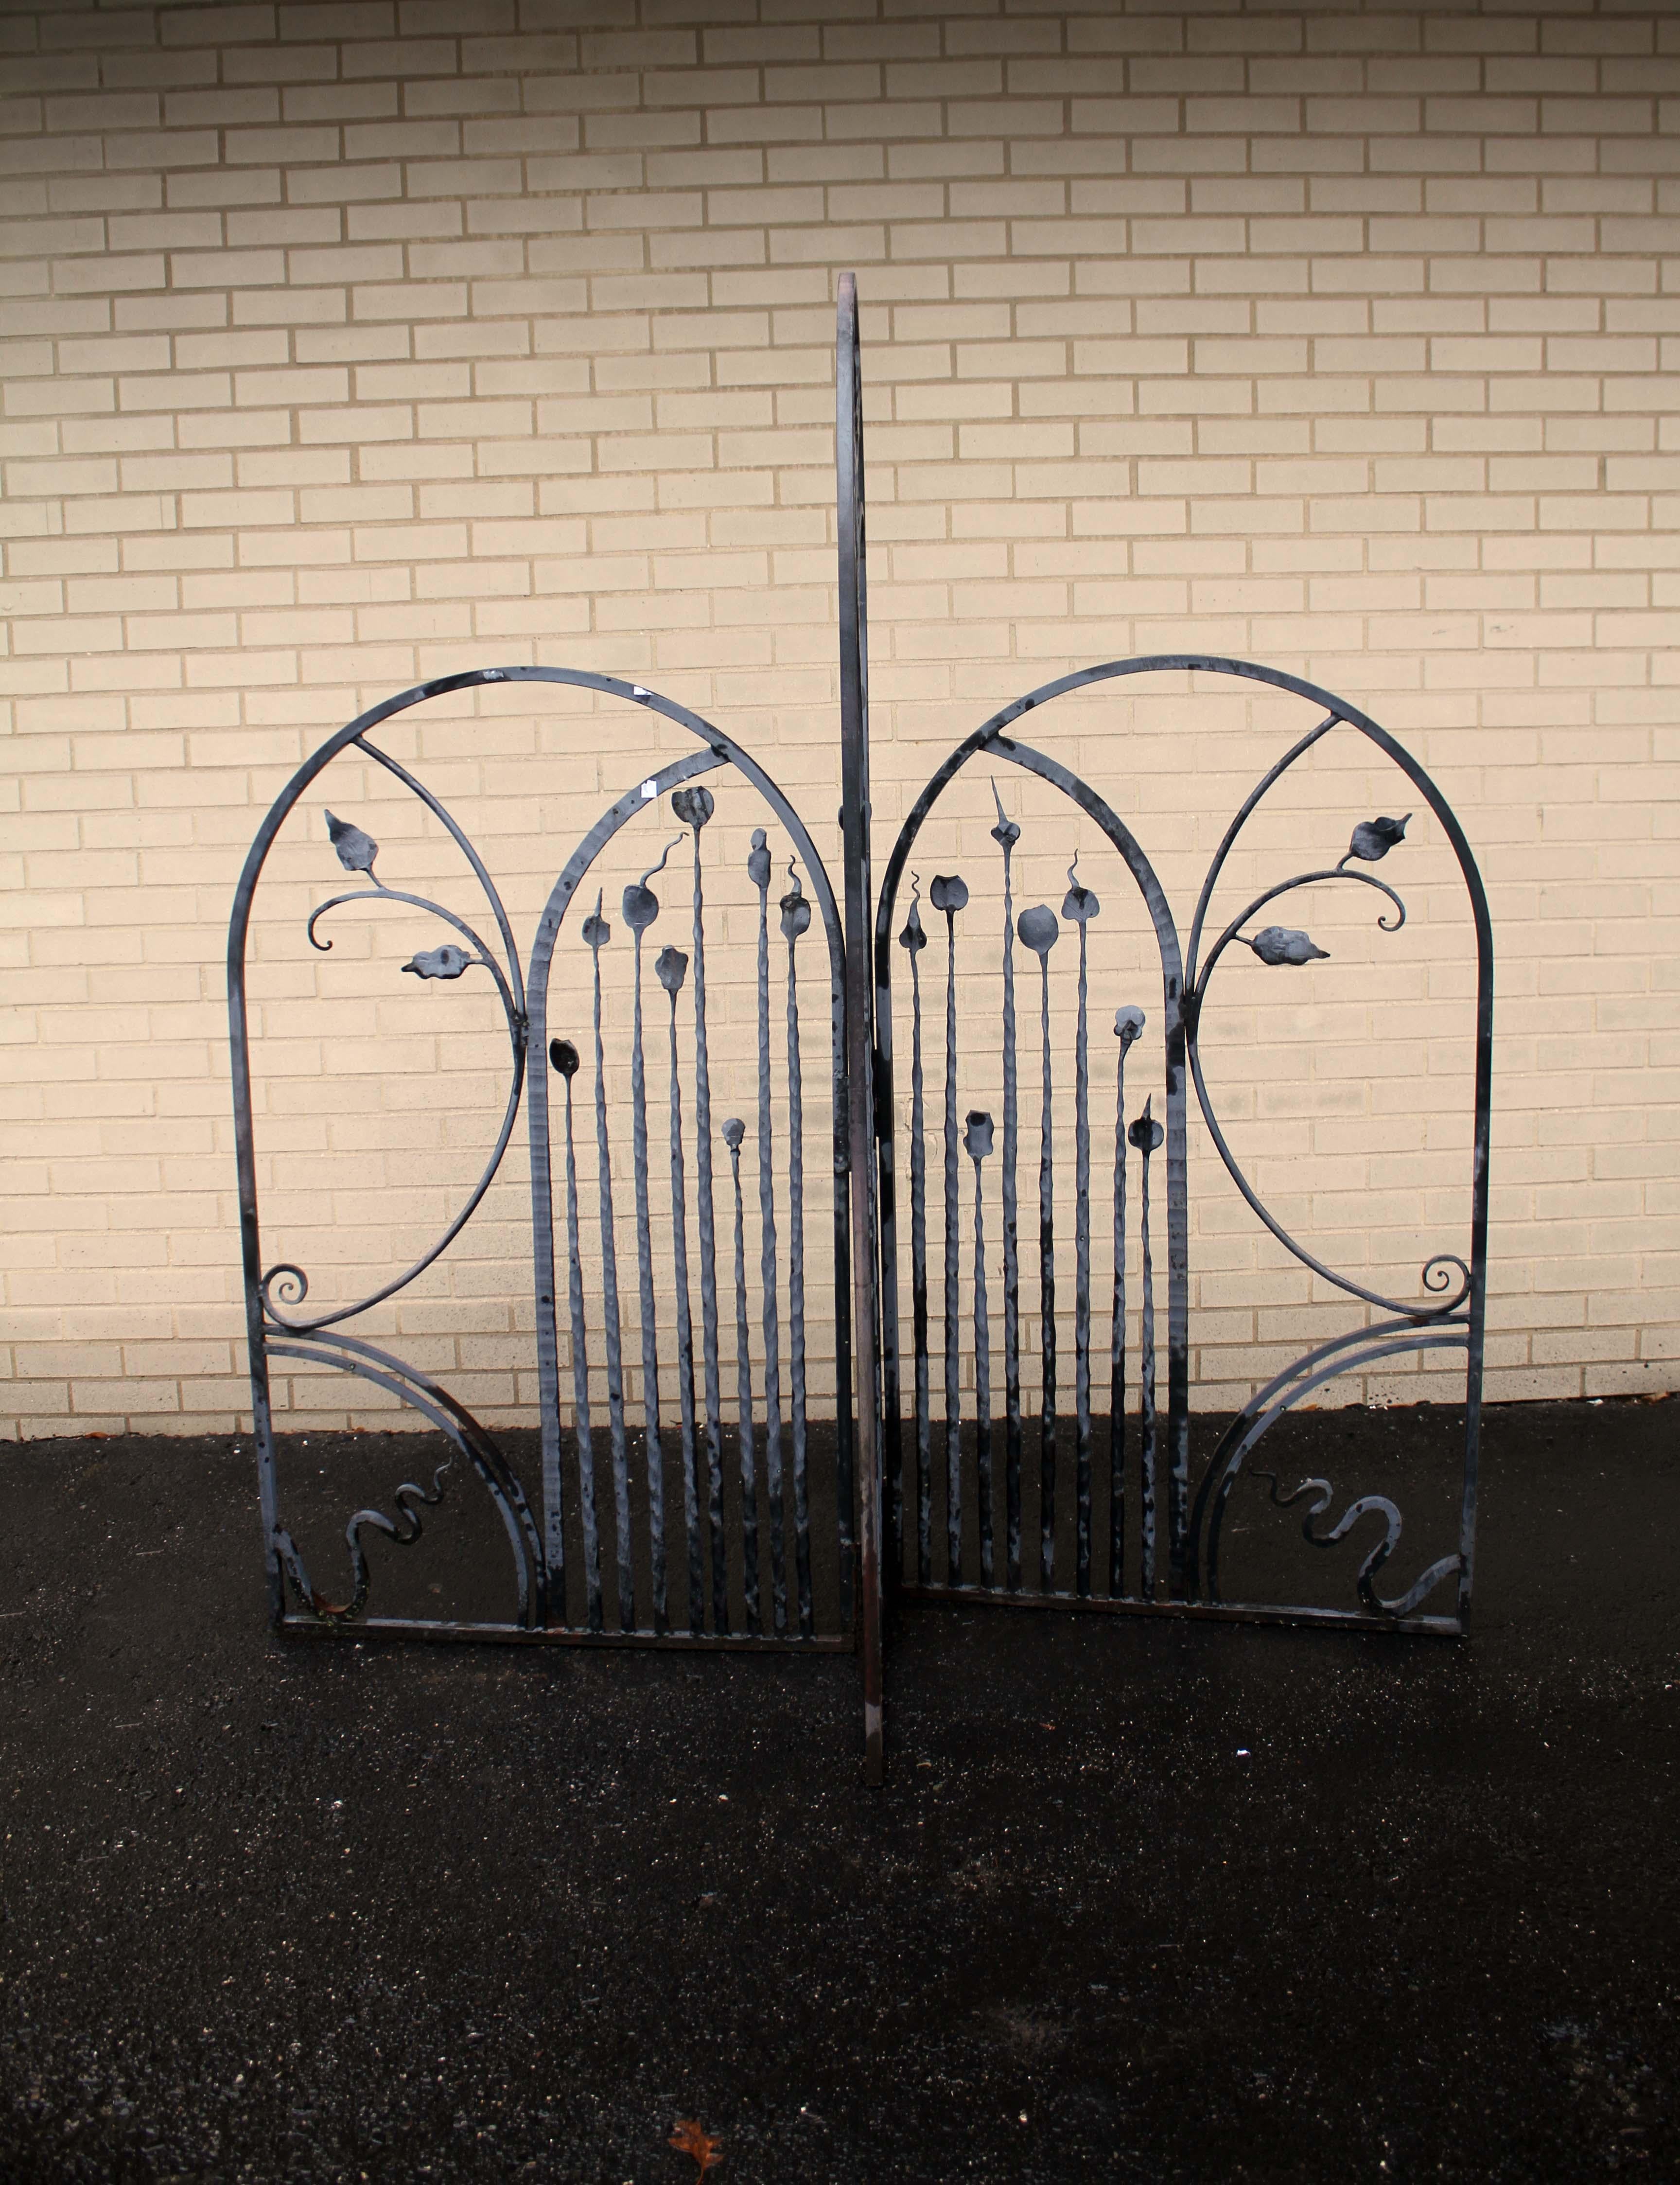 This black outdoor gate sculpture is a unique and eye-catching piece of art. Crafted from wrought iron, this piece of outdoor decor adds an elegant yet modern touch to any garden or outdoor space. The intricate design of the gate creates a